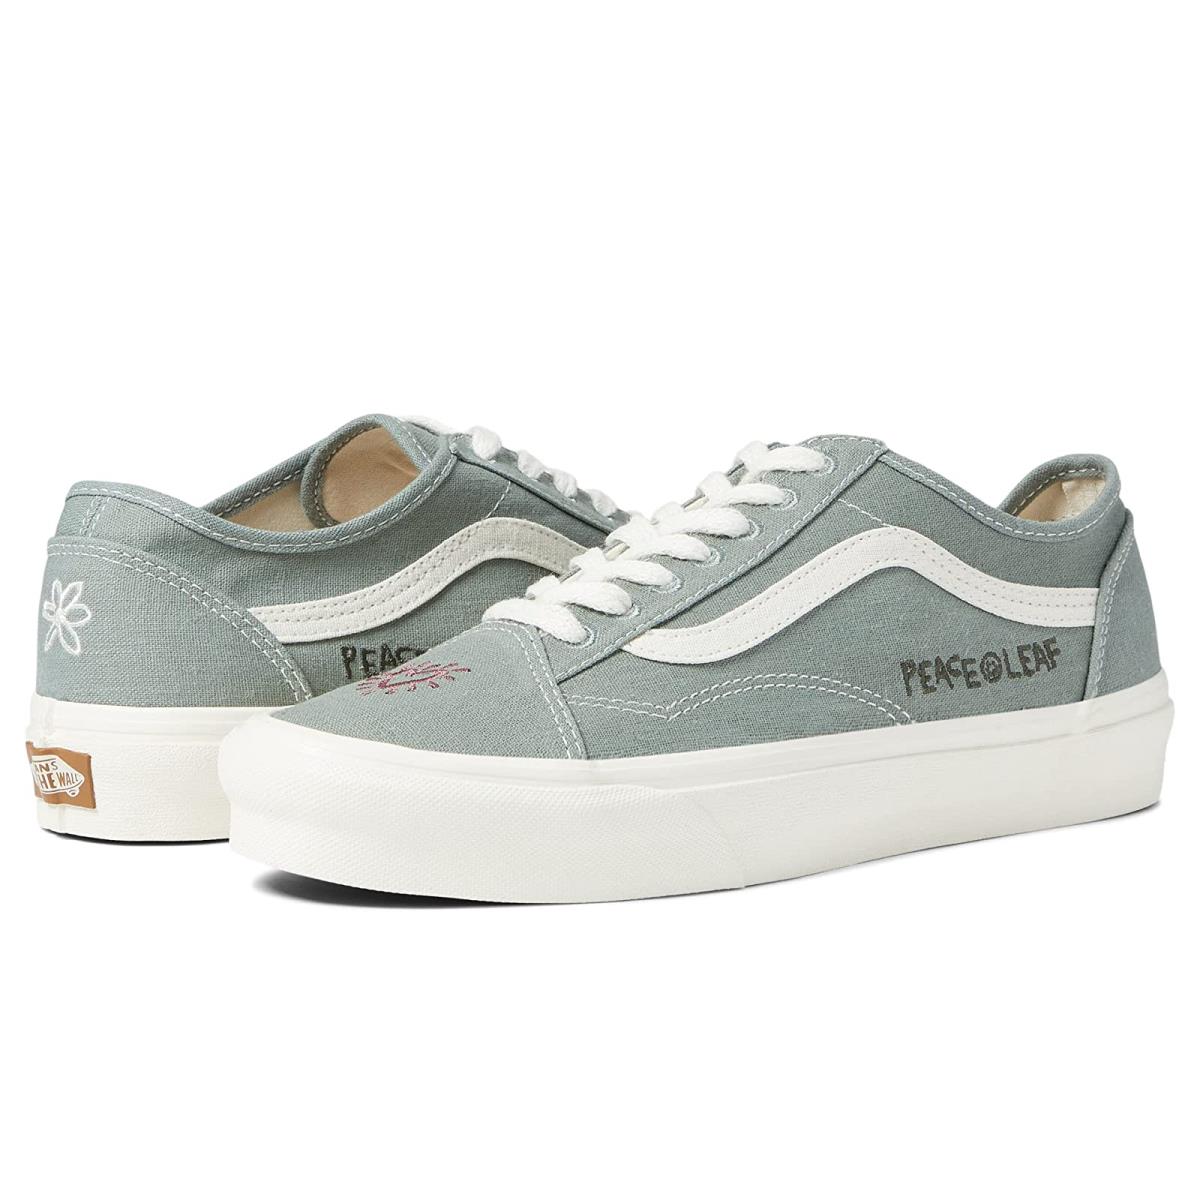 Unisex Sneakers Athletic Shoes Vans Old Skool Tapered (Eco Theory) Green Milleu/Marshmallow